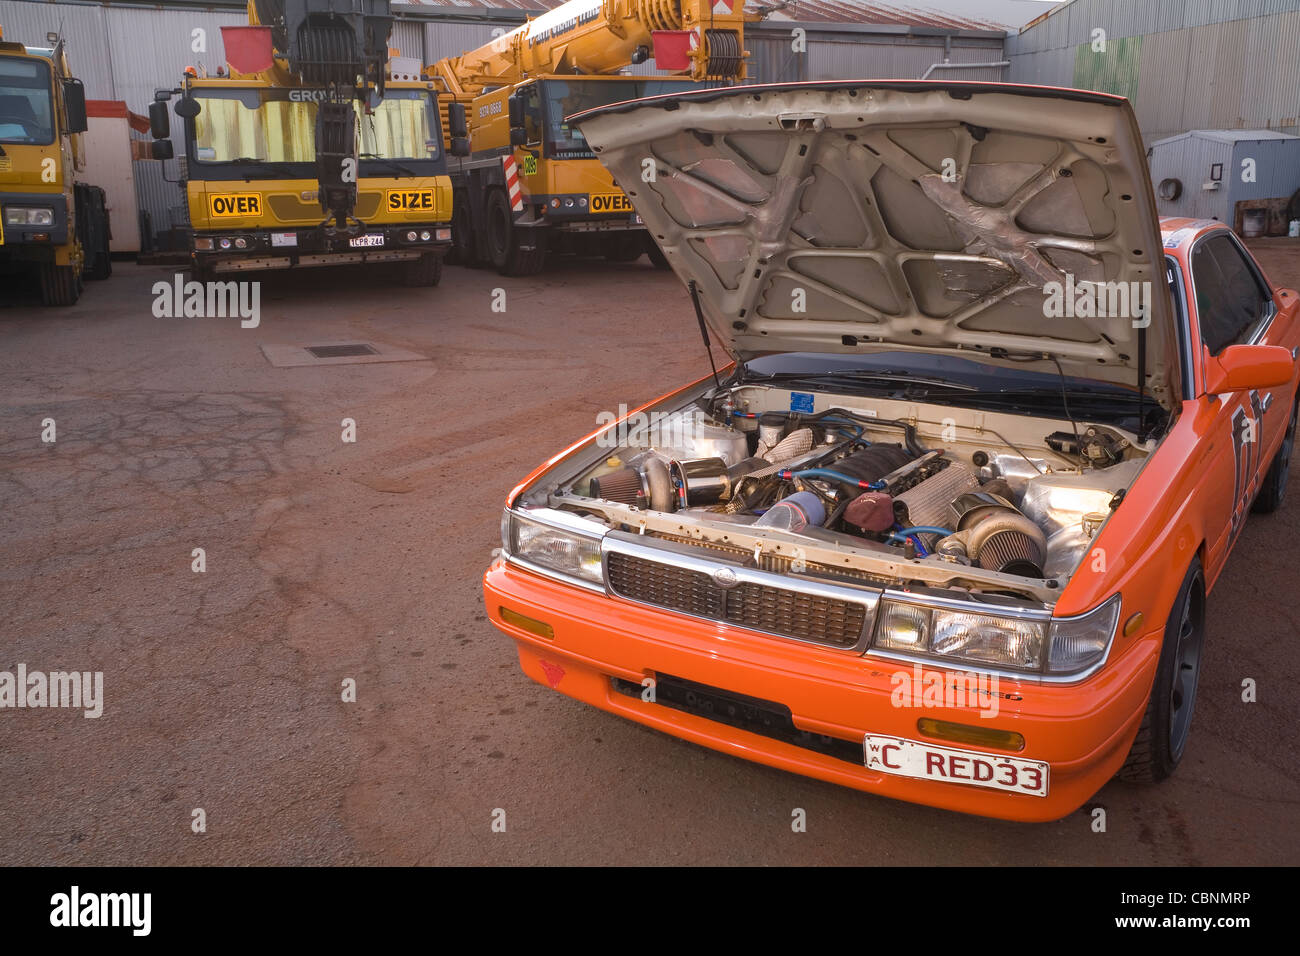 Heavily modified and custom Nissan Laurel motorsport car fitted with twin turbo LS1 V8 Chevrolet engine Stock Photo